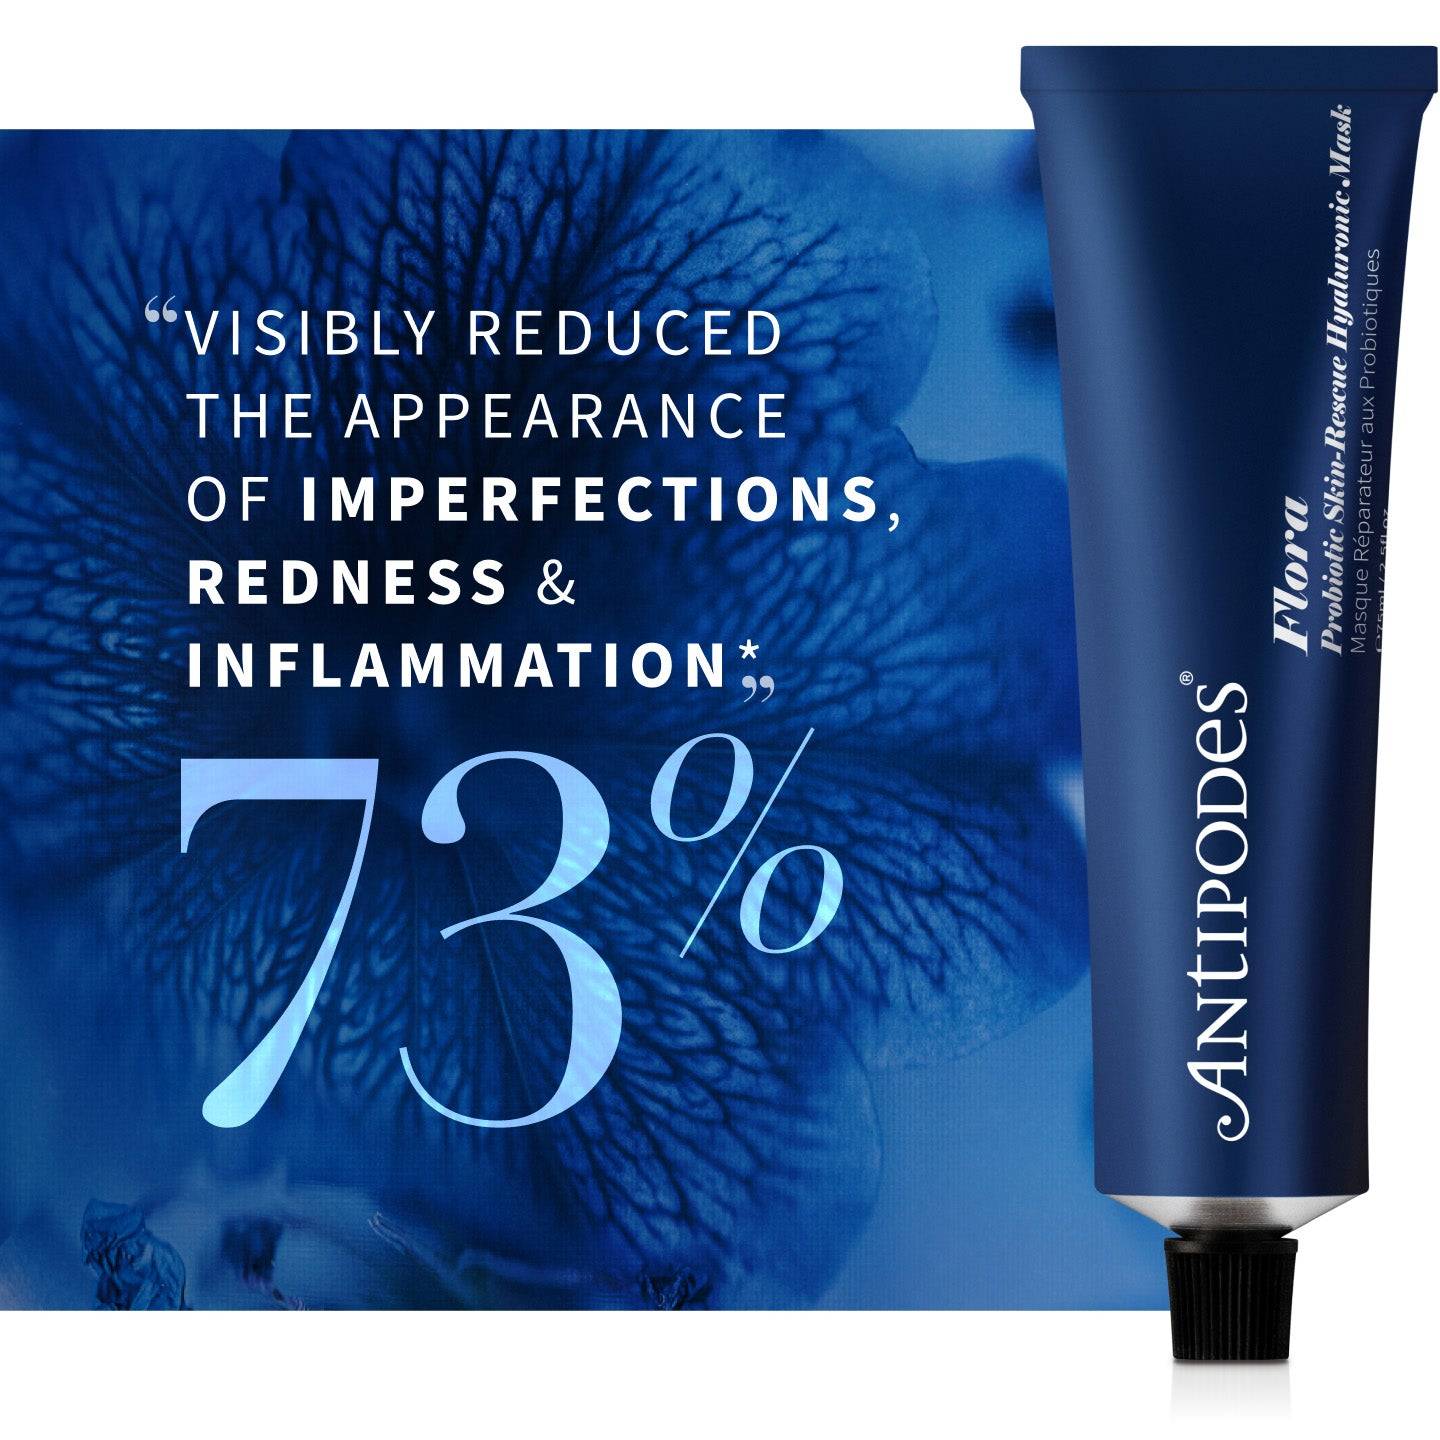 73% said Flora visibly reduced the appearance of imperfections, redness & inflammation*.